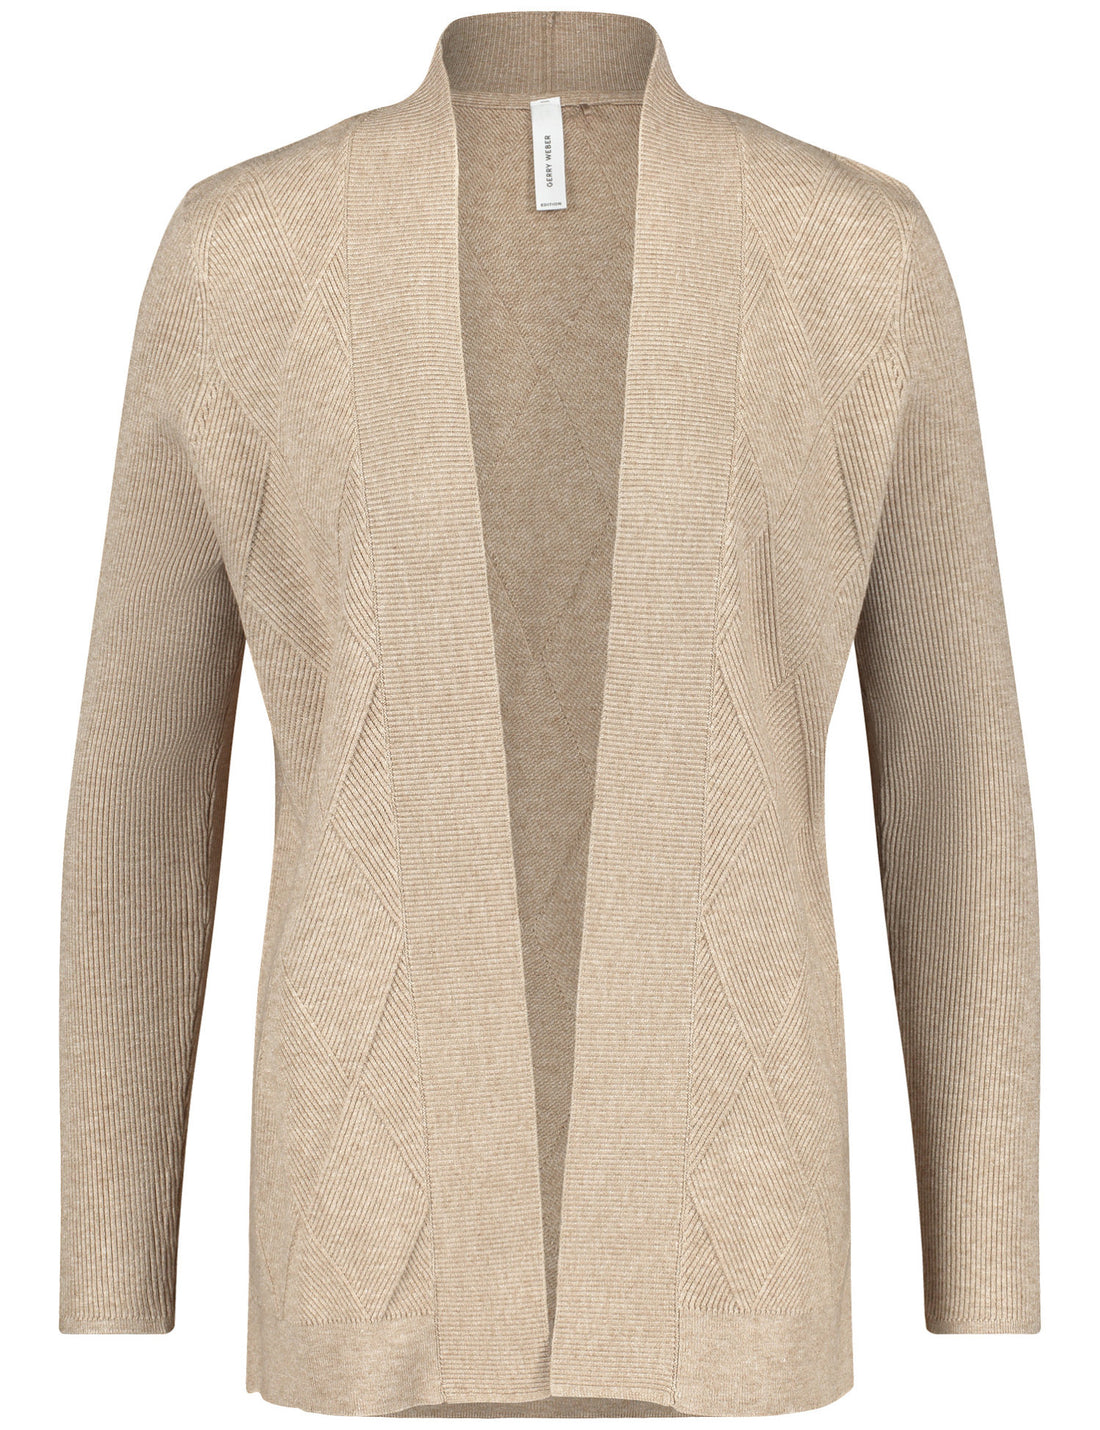 Beige Knitted Cardigan_130205-44723_904980_01